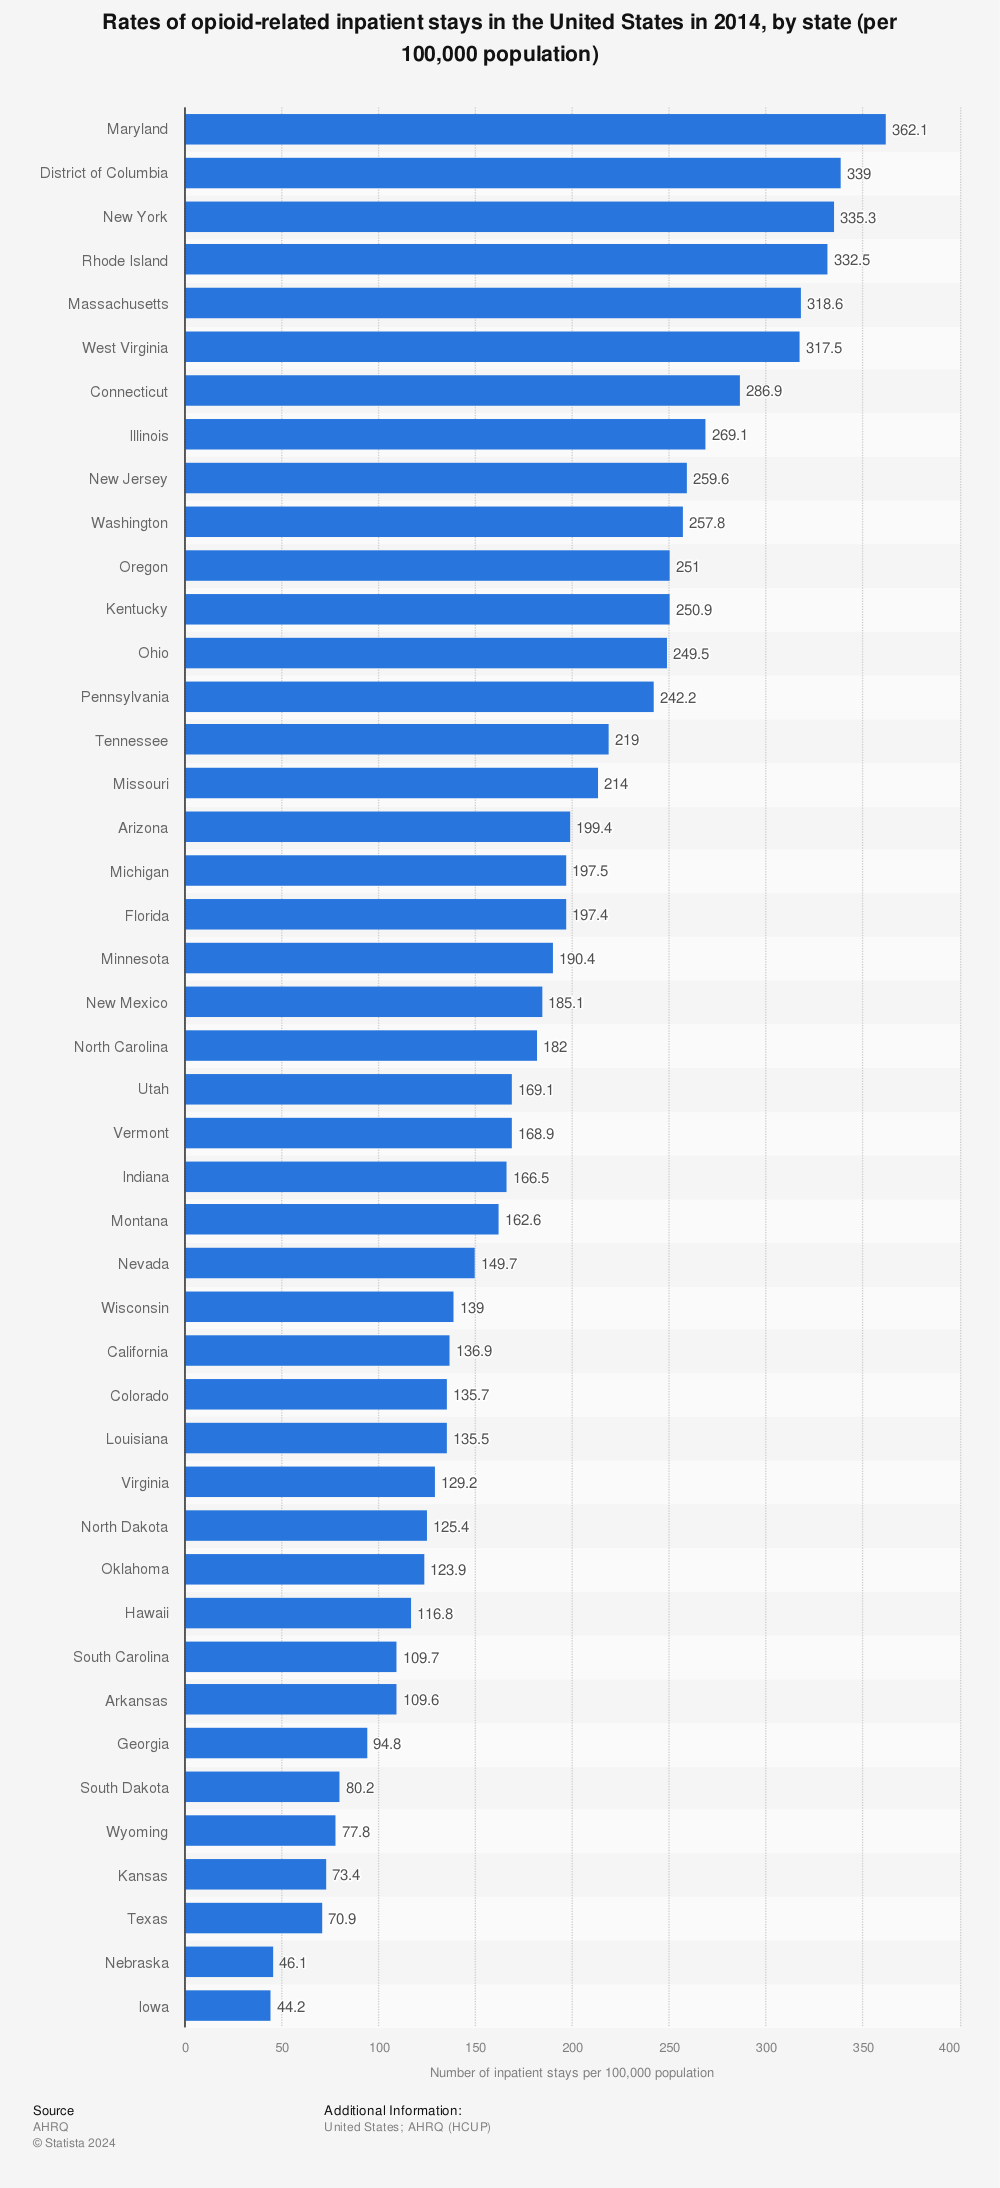 Statistic: Rates of opioid-related inpatient stays in the United States in 2014, by state (per 100,000 population) | Statista